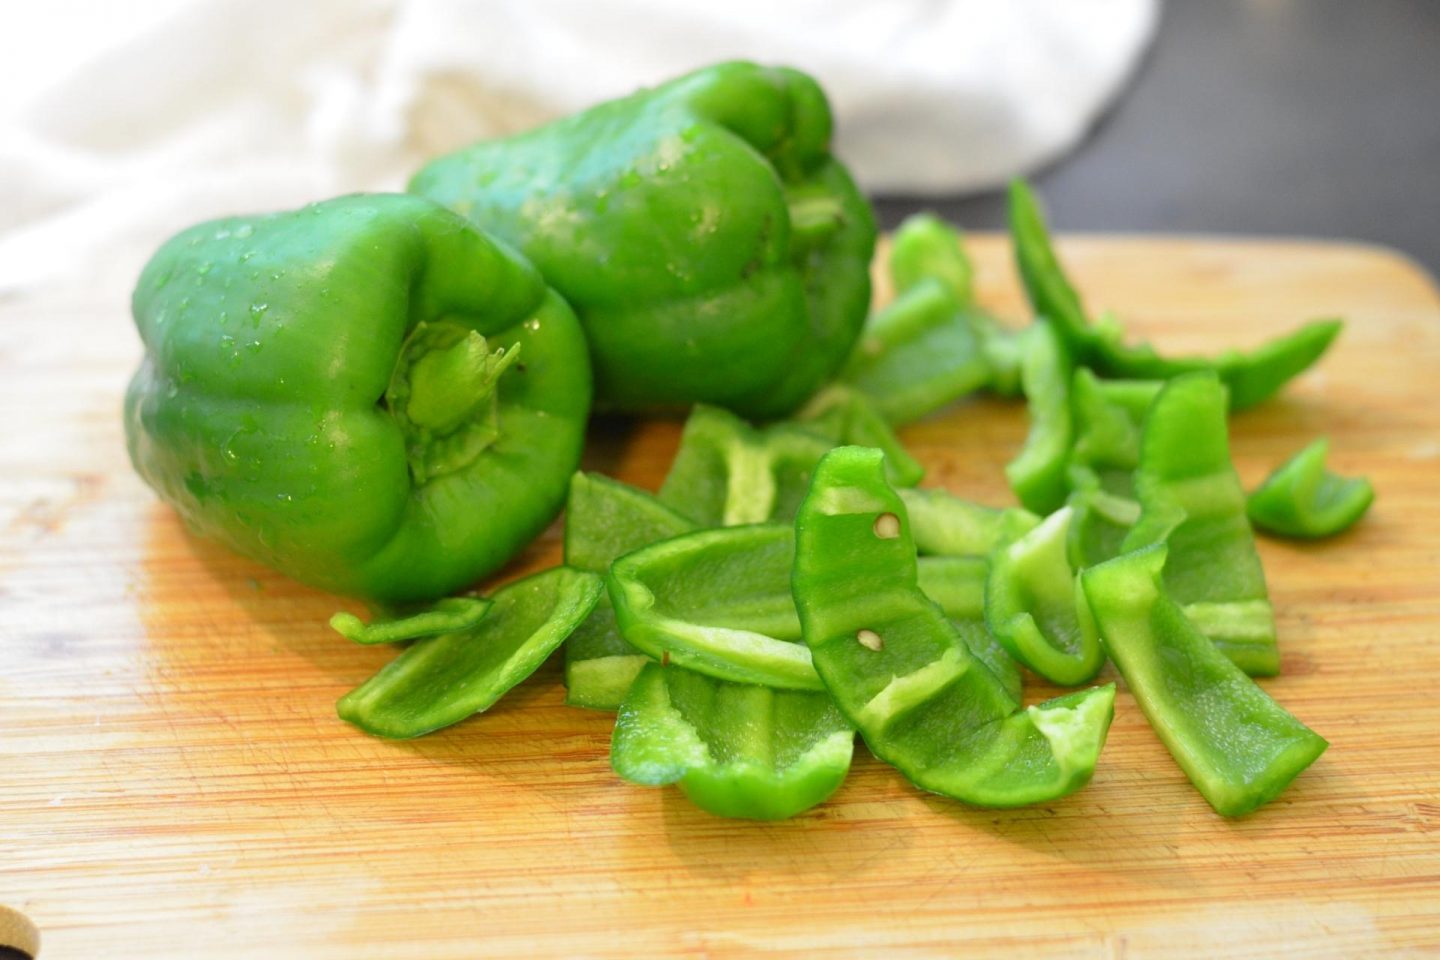 Large green peppers